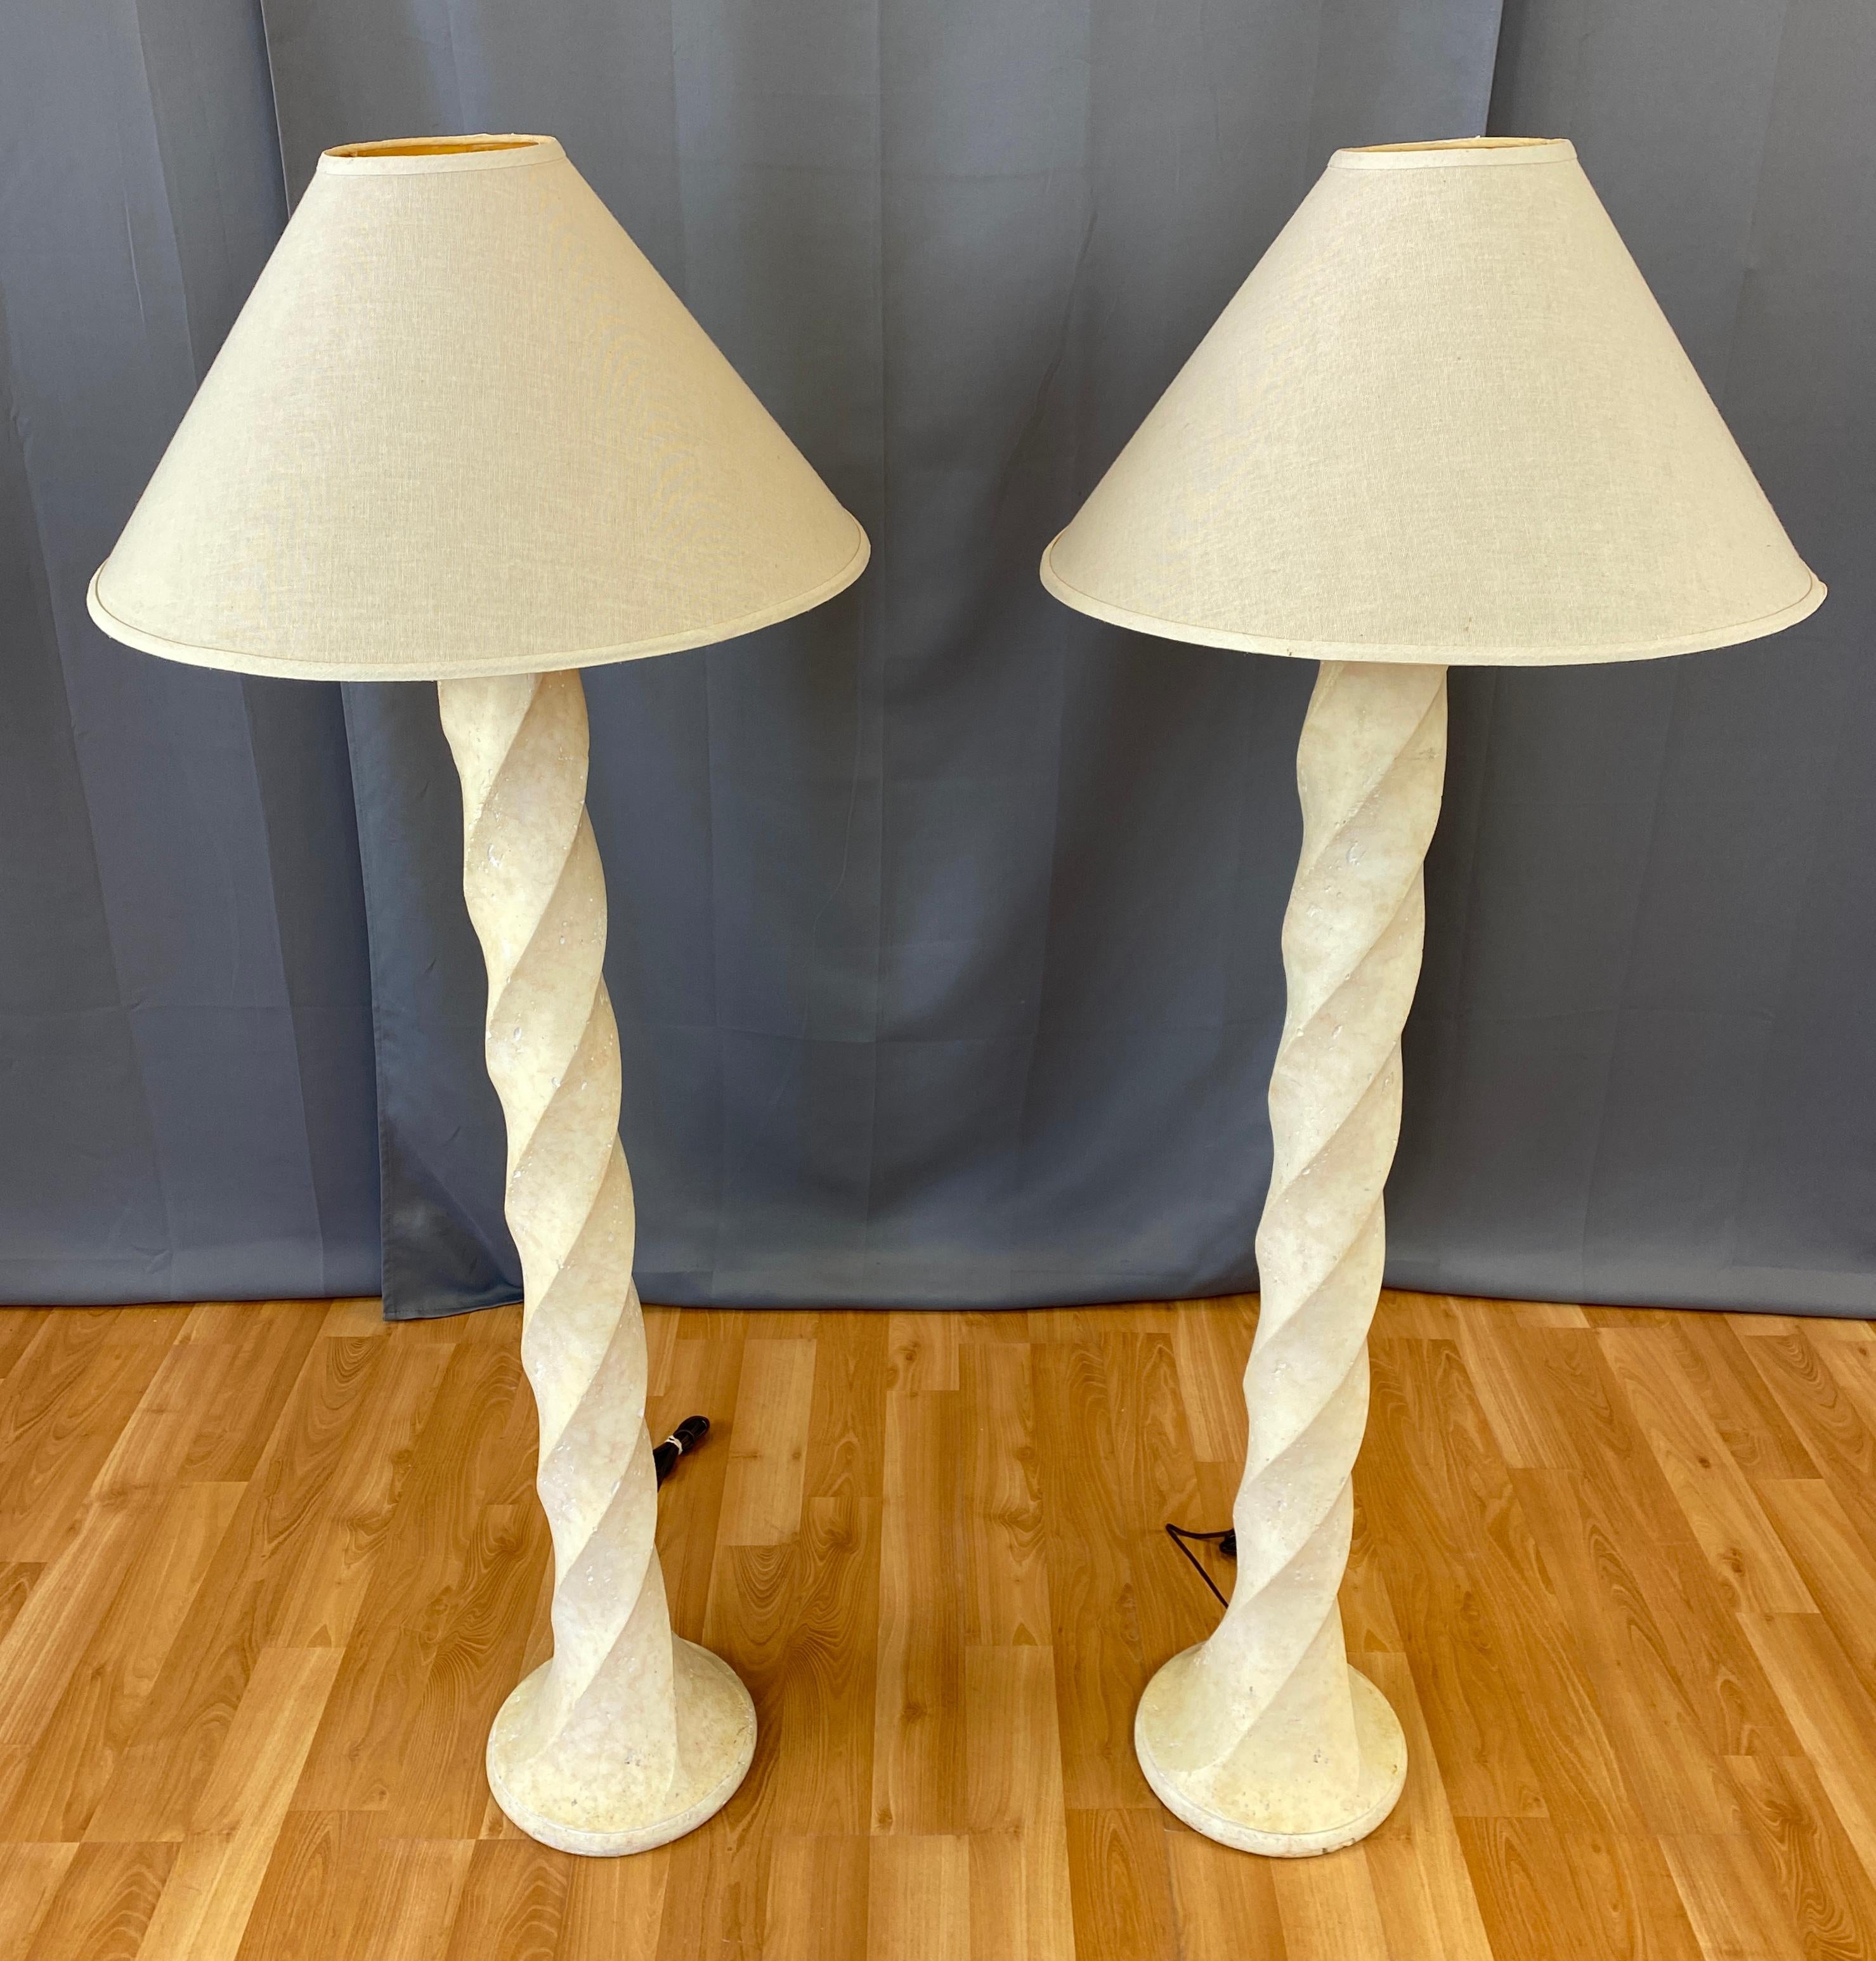 A classically chic pair of tall spiral plaster floor lamps, in the style of Michael Taylor's designs.
Architectural and timeless, with sculptural corkscrew columns that transition smoothly to perfectly proportioned bases. 

Shades are 6 1/8 top,